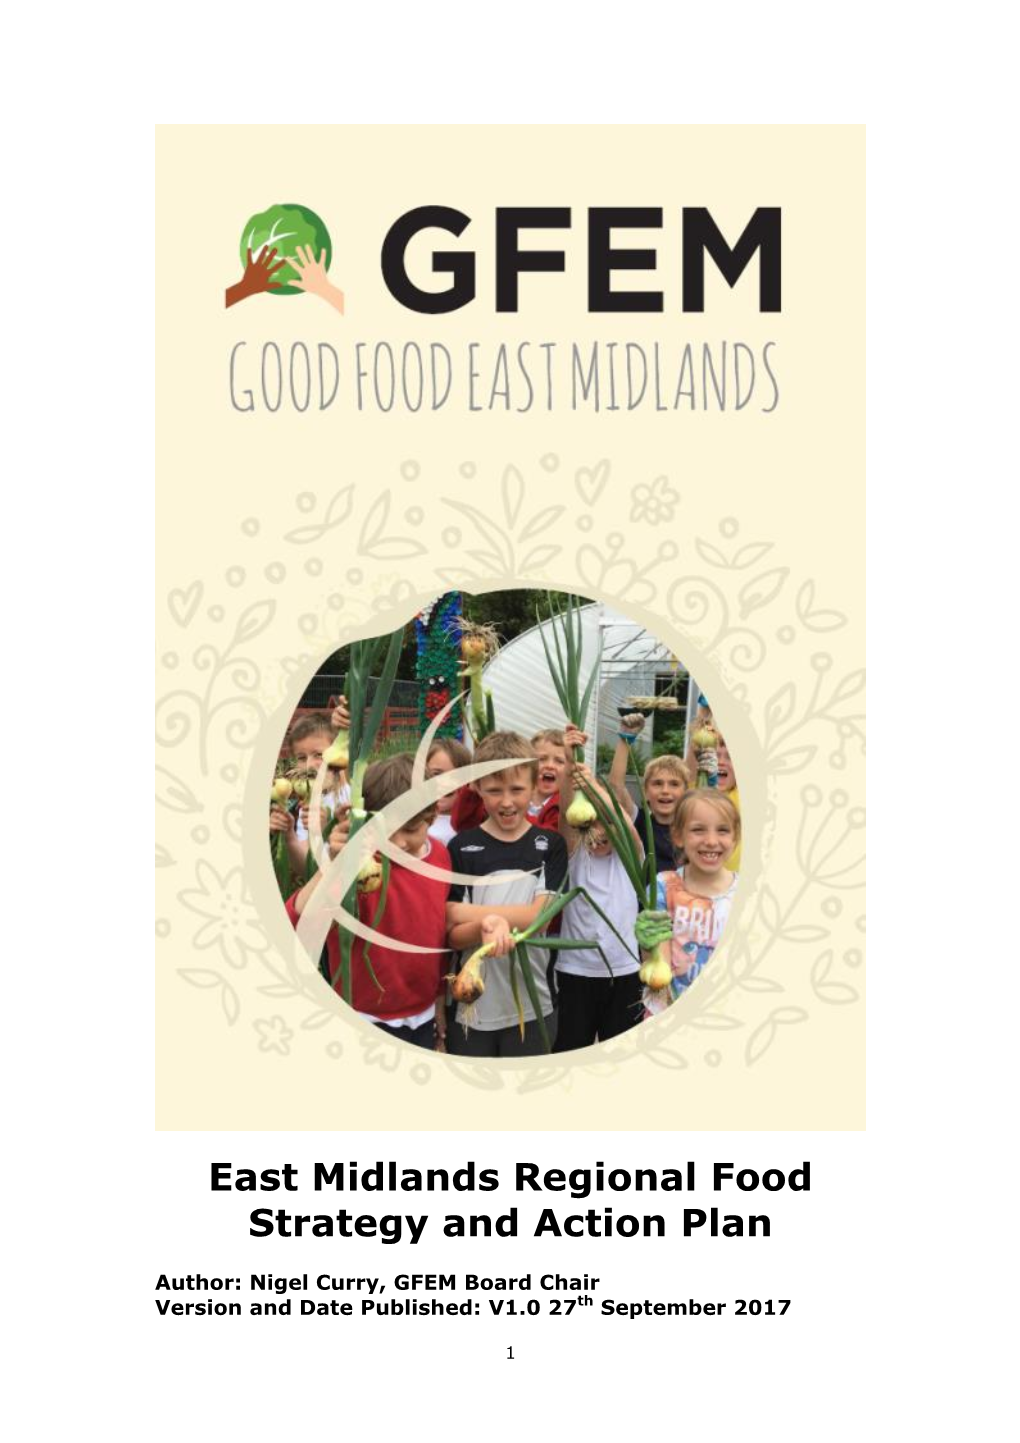 East Midlands Regional Food Strategy and Action Plan